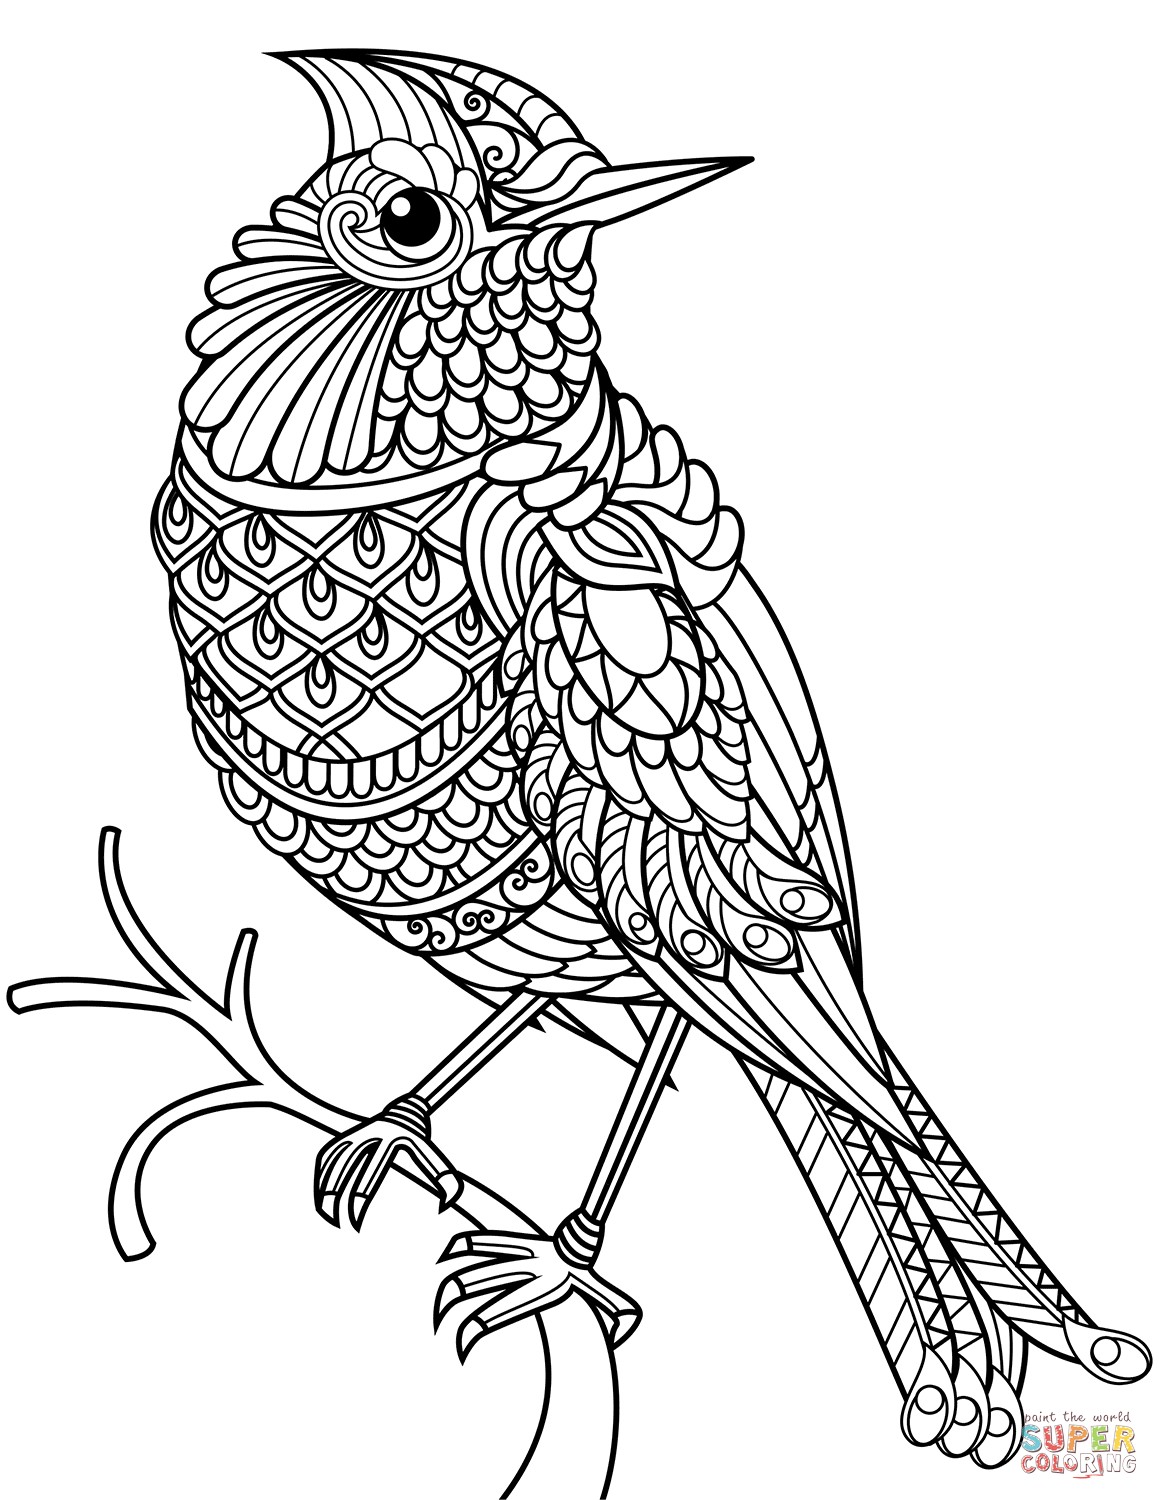 hung-birds-coloring-page-bird-drawings-bird-coloring-pages-sketches